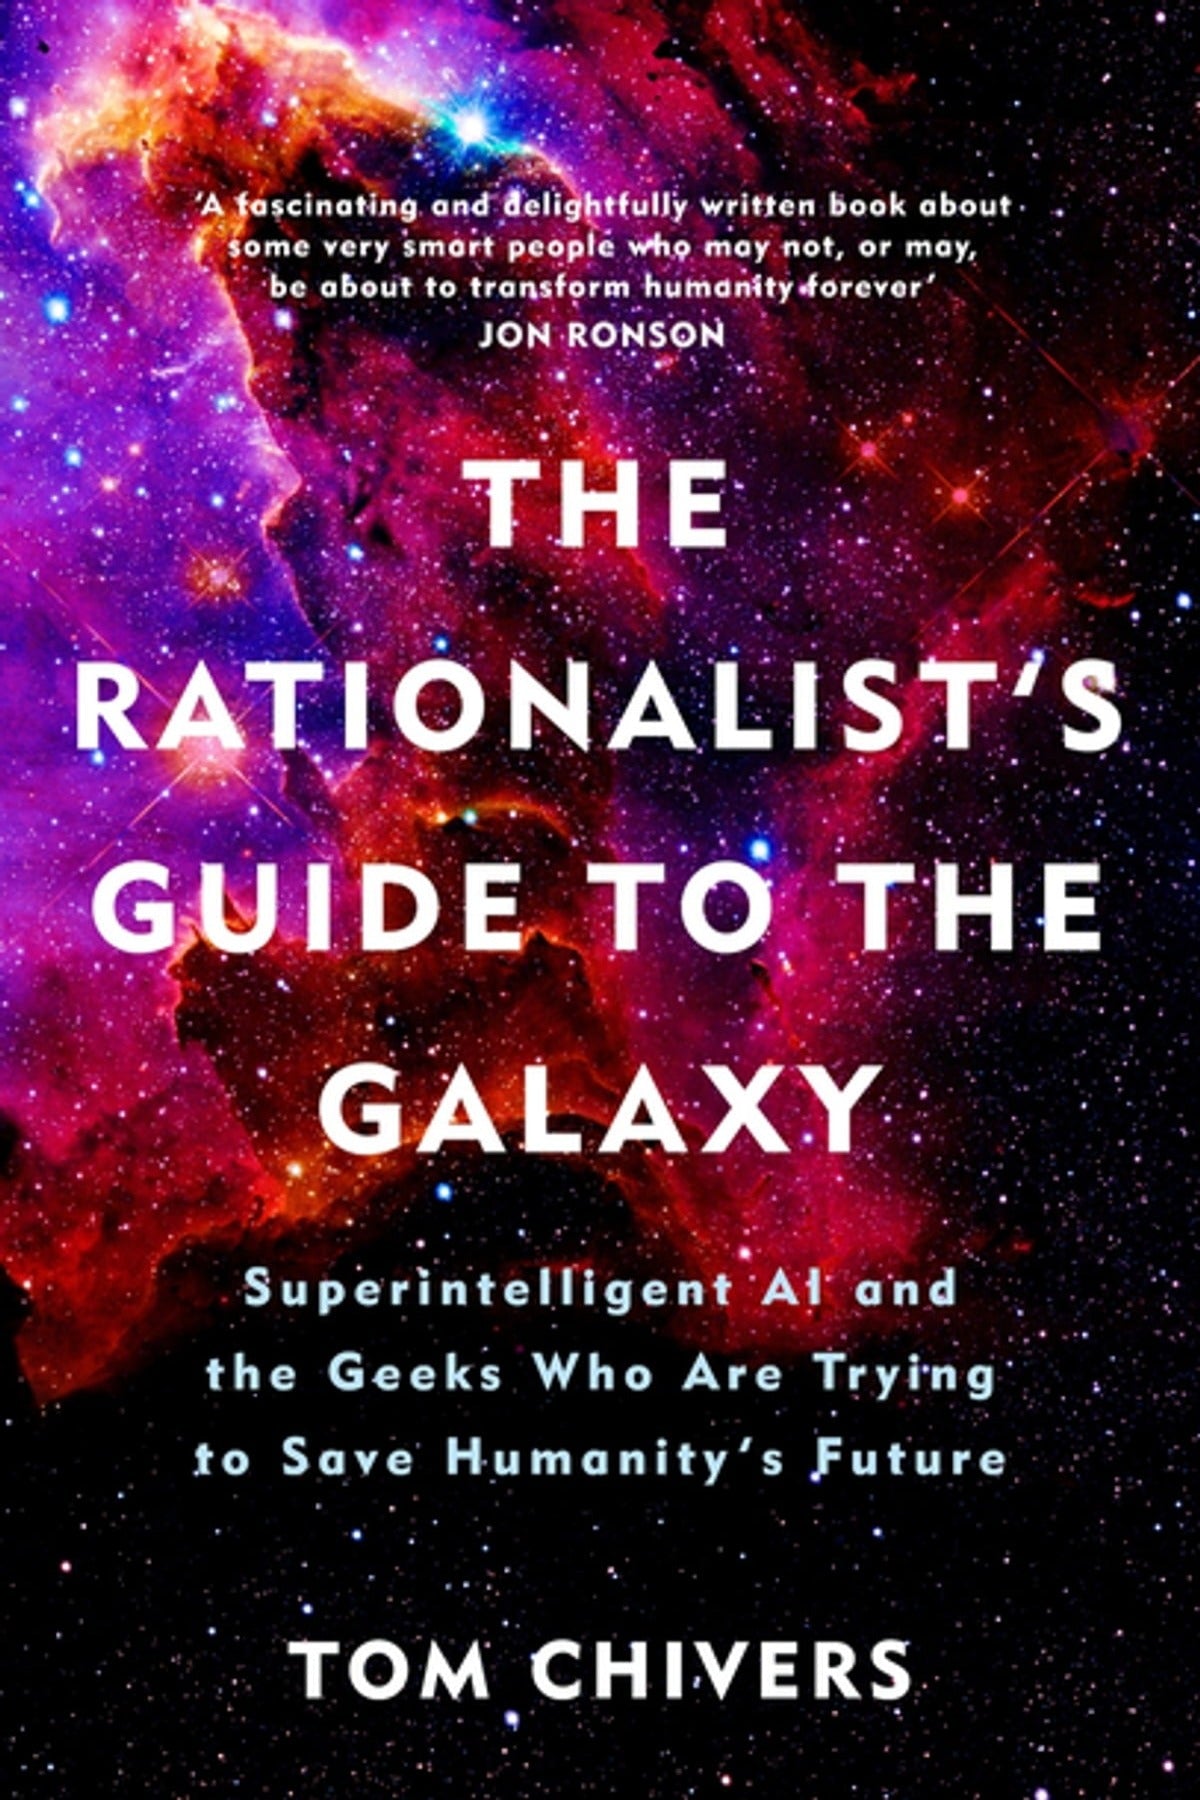 The Rationalist's Guide to the Galaxy: Superintelligent AI and the Geeks Who Are Trying to Save Humanity's Future